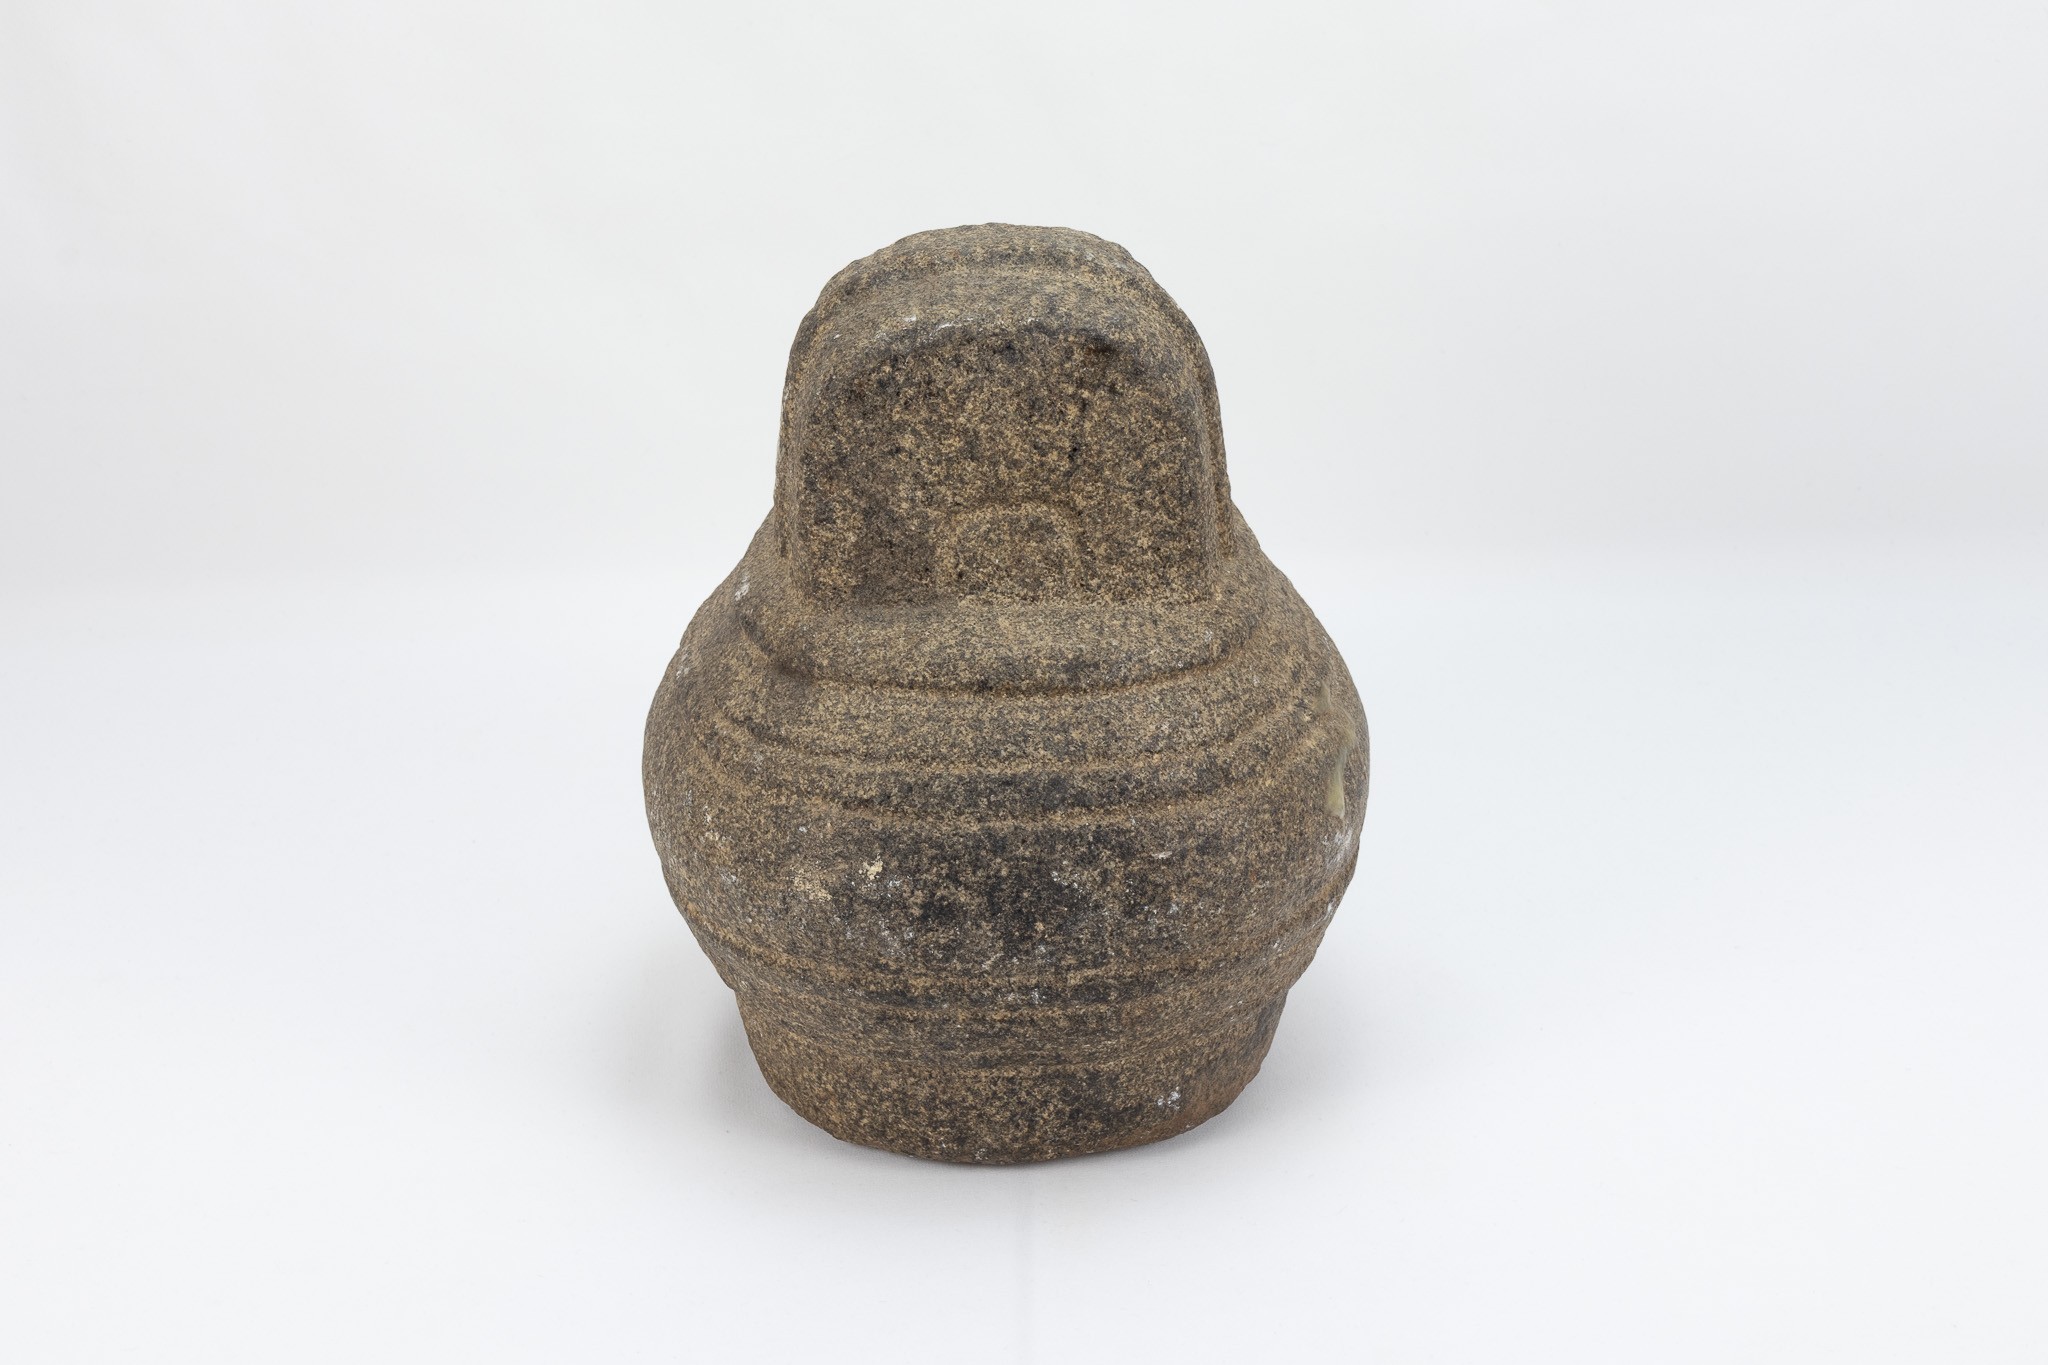 A Granite Weight Unit from Circa Early to 1st Millennium B.C. 

H: Approximately 23cm

The following